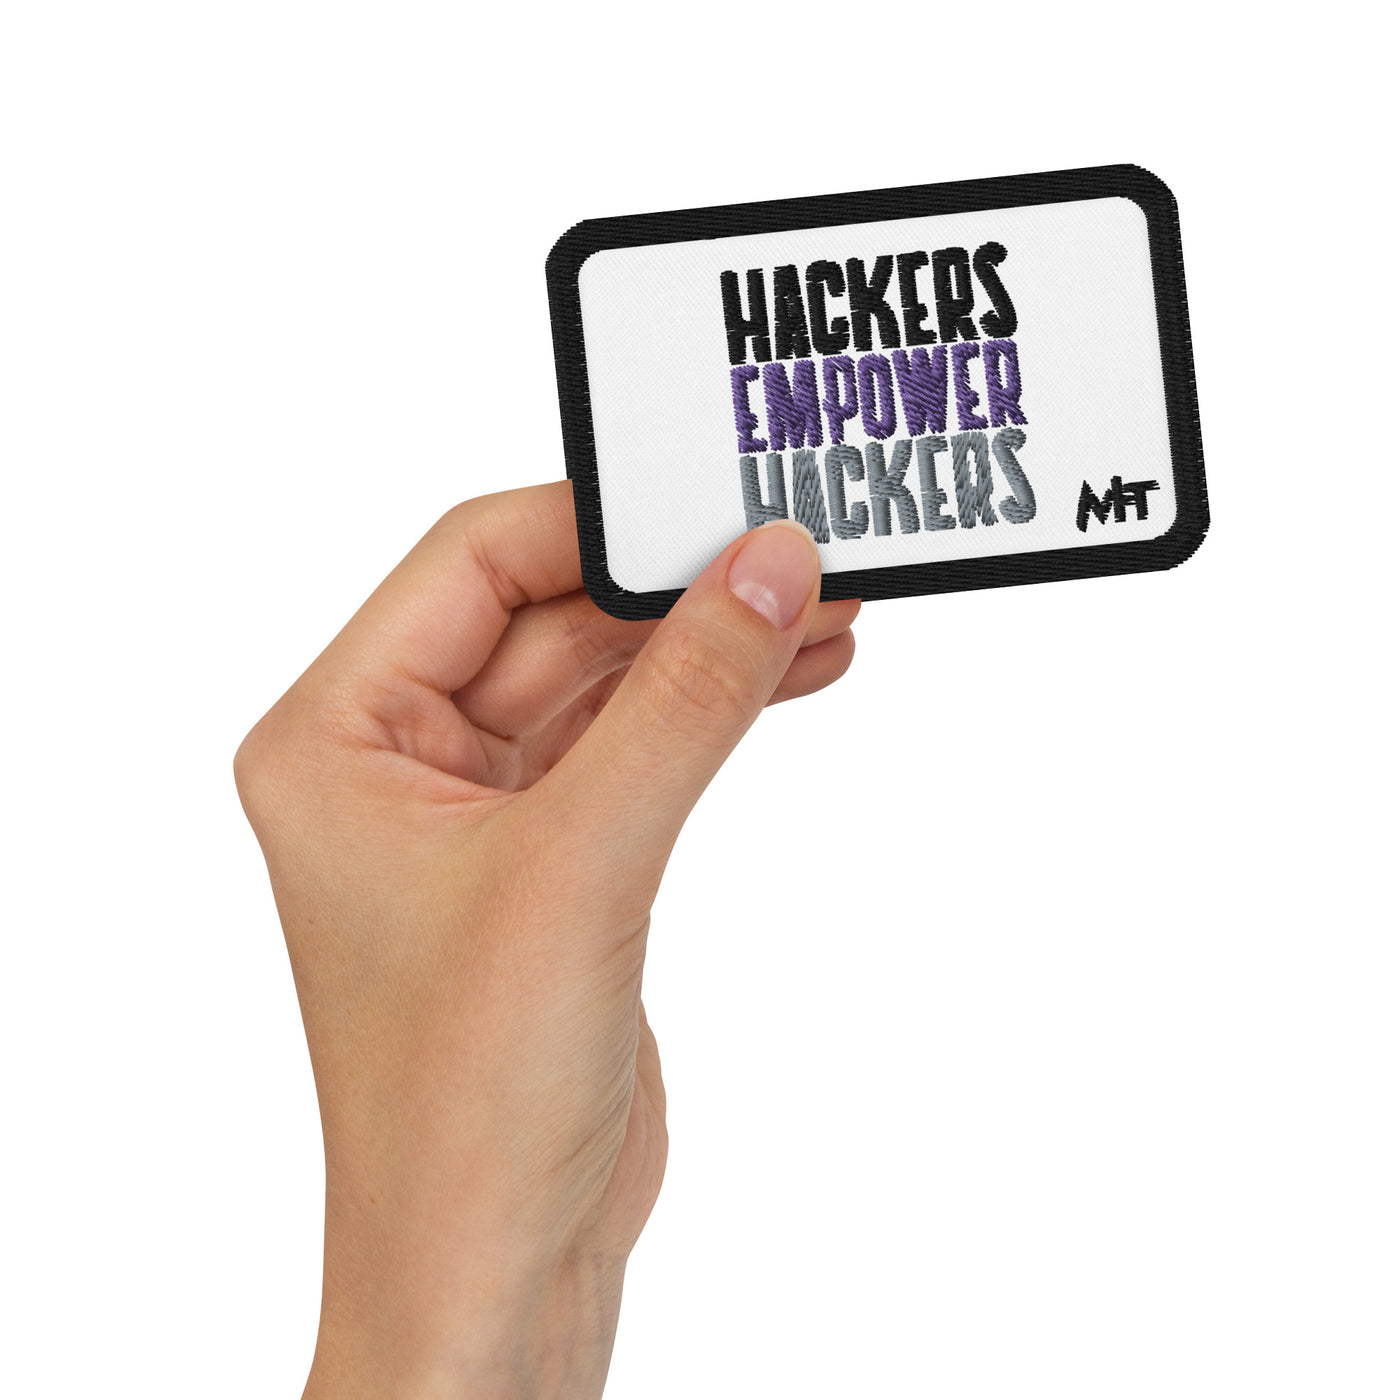 Hackers Empower Hackers - Embroidered patches